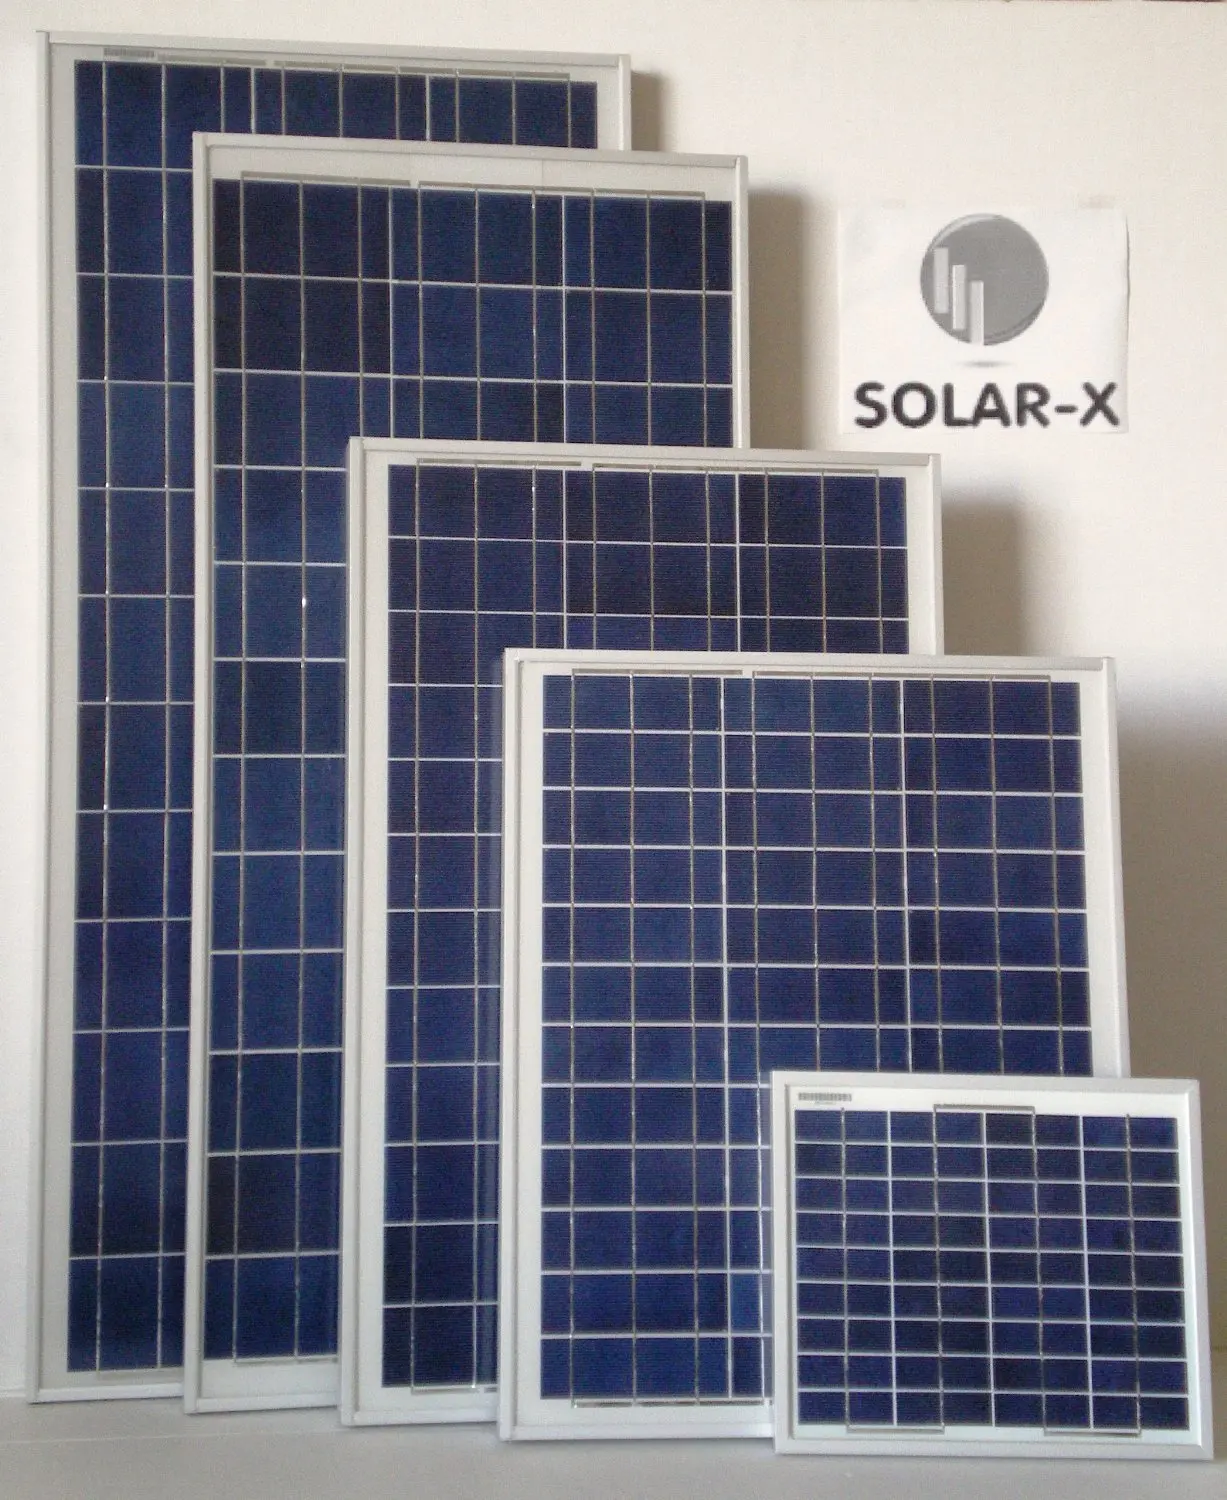 Cheap Spectrolab Solar Cells For Sale, find Spectrolab Solar Cells For Sale deals on line at ...